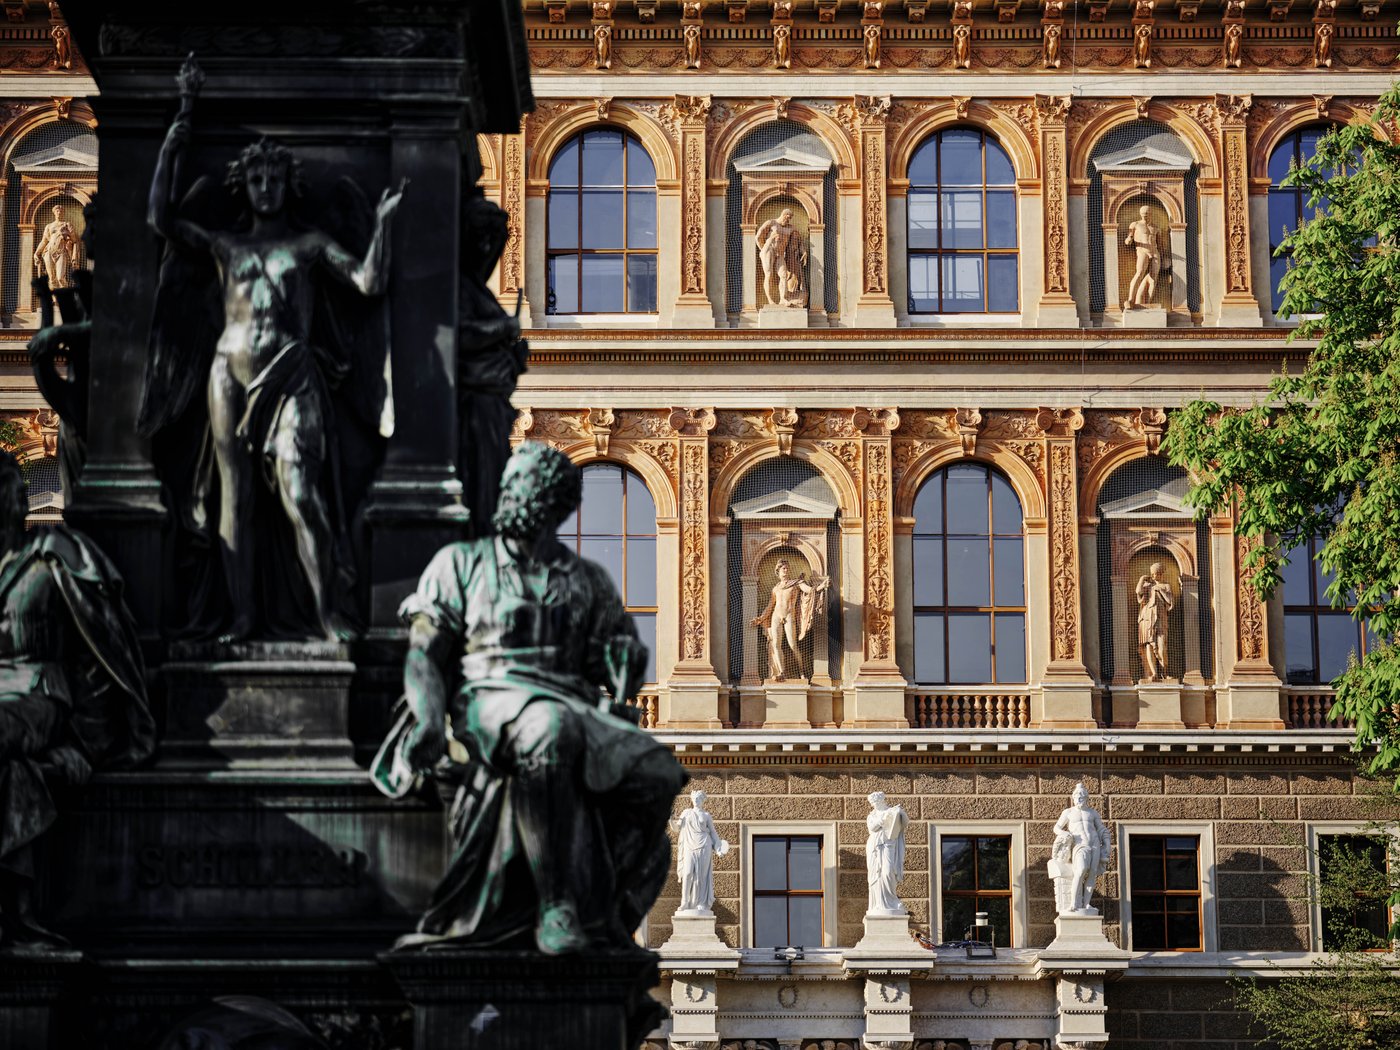 Detail of the facade of the academy building at Schillerplatz with a section of the Schiller monument in front of it